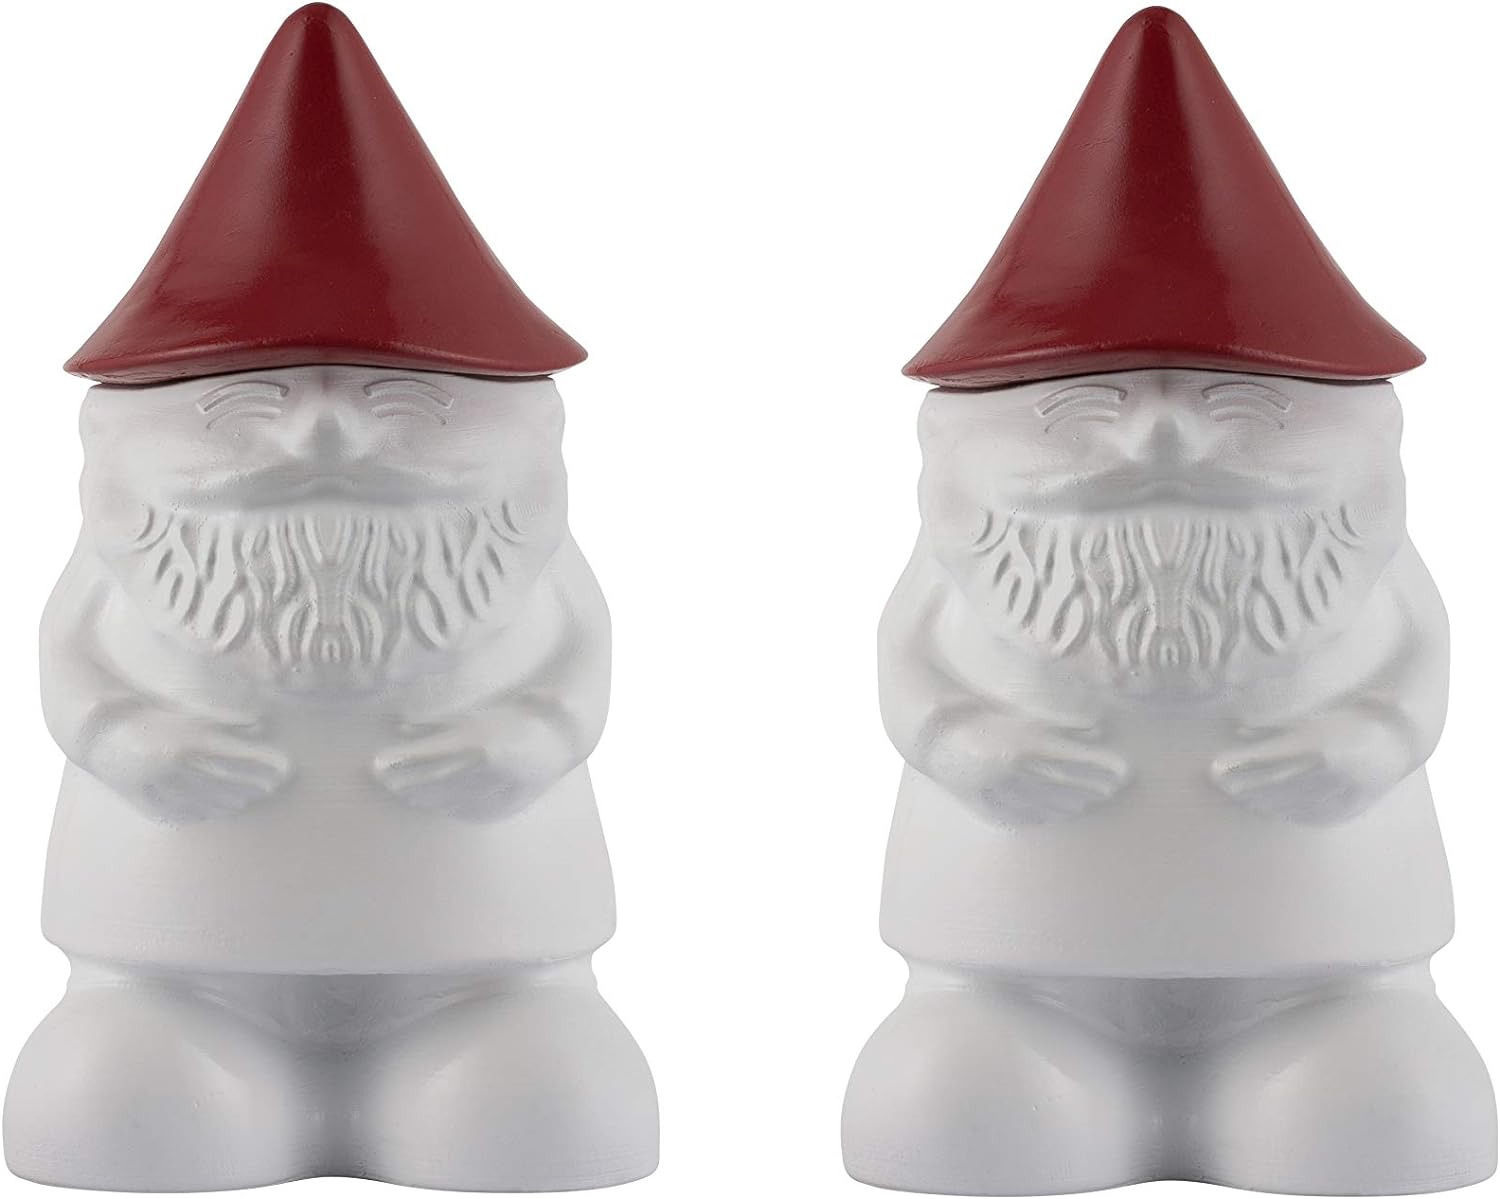 These are absolutely adorable and perfect for a patio or porch. Easy to fill. It doesnt leave black on the gnome and its very high quality material. I definitely recommend this item